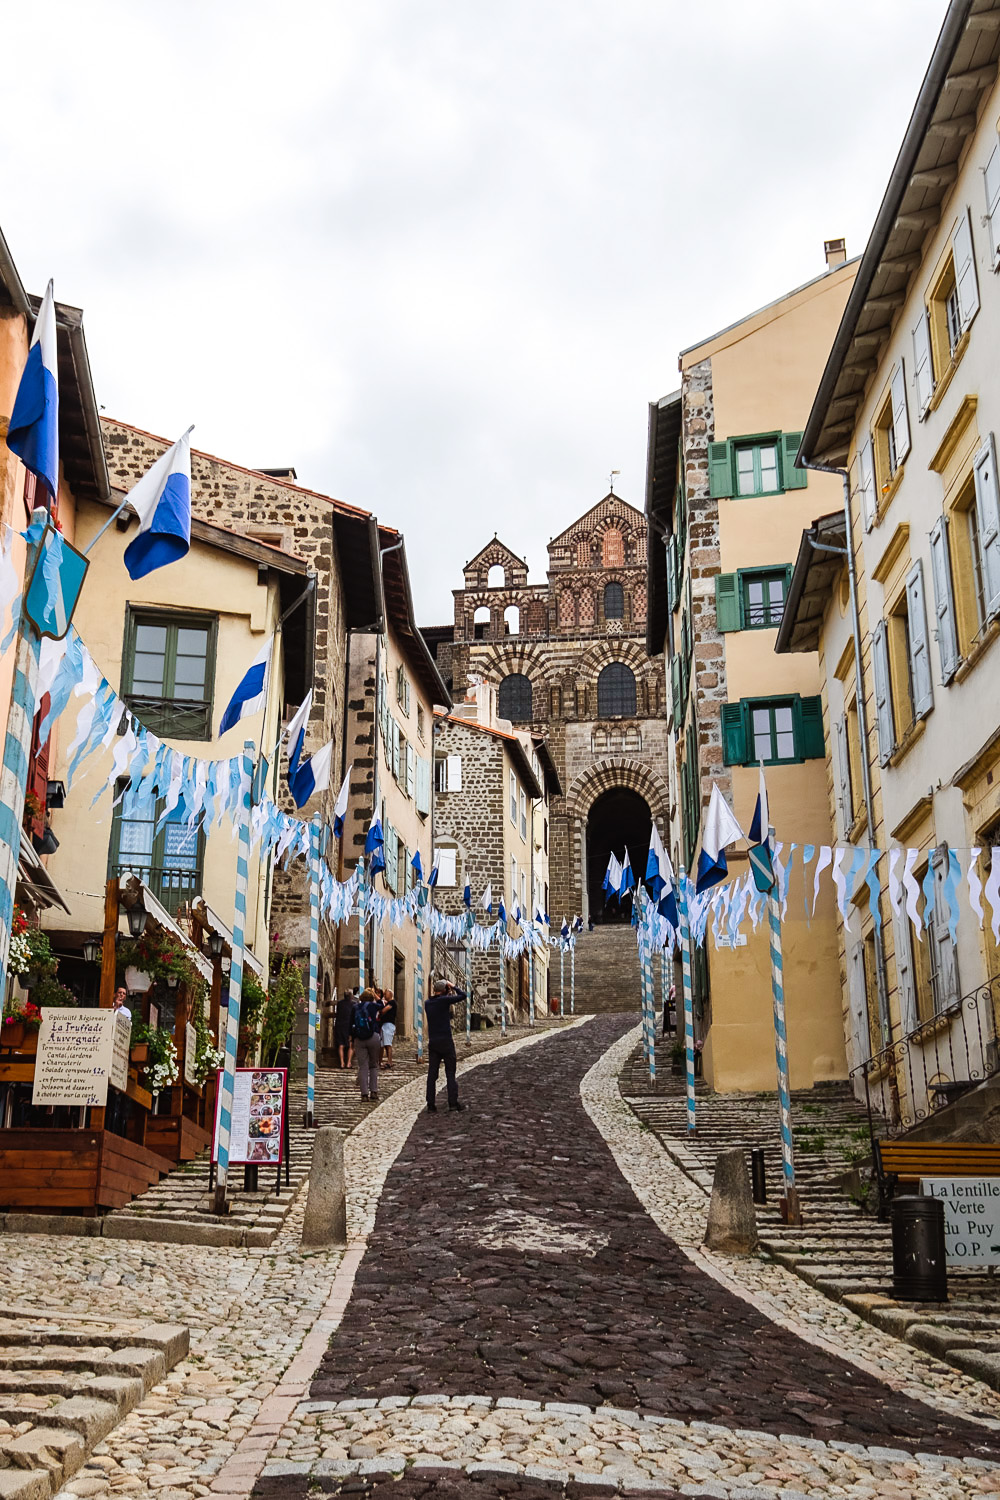 Le Puy en Velay is a picturesque town in the Auvergne region of France. The Cathedral of Our Lady of the Annunciation, a stunning 12th century Romanesque church